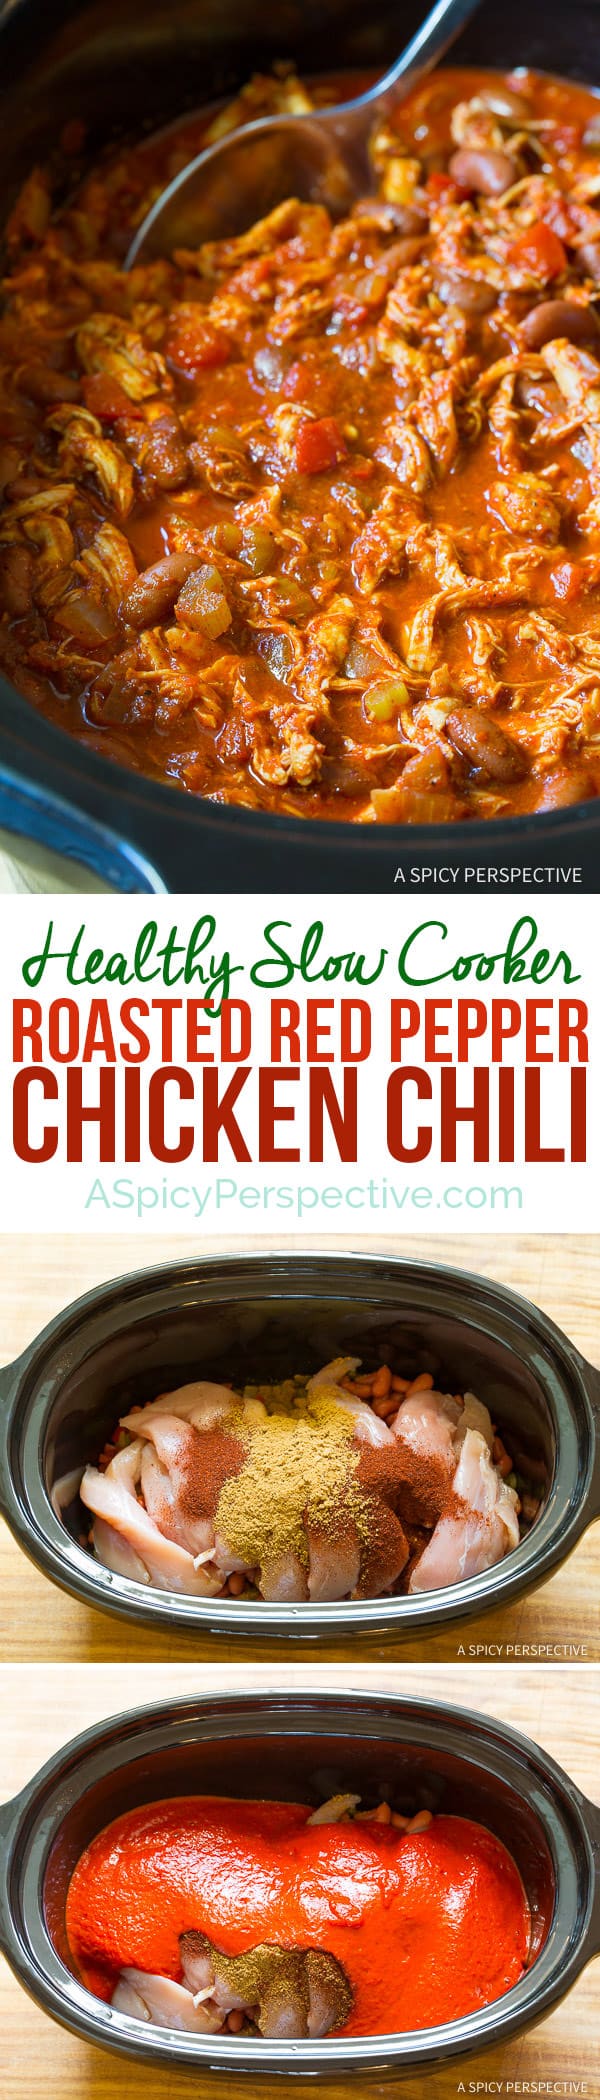 Healthy Slow Cooker Roasted Red Pepper Chicken Chili Recipe (Gluten Free & Dairy Free) | ASpicyPerpective.com